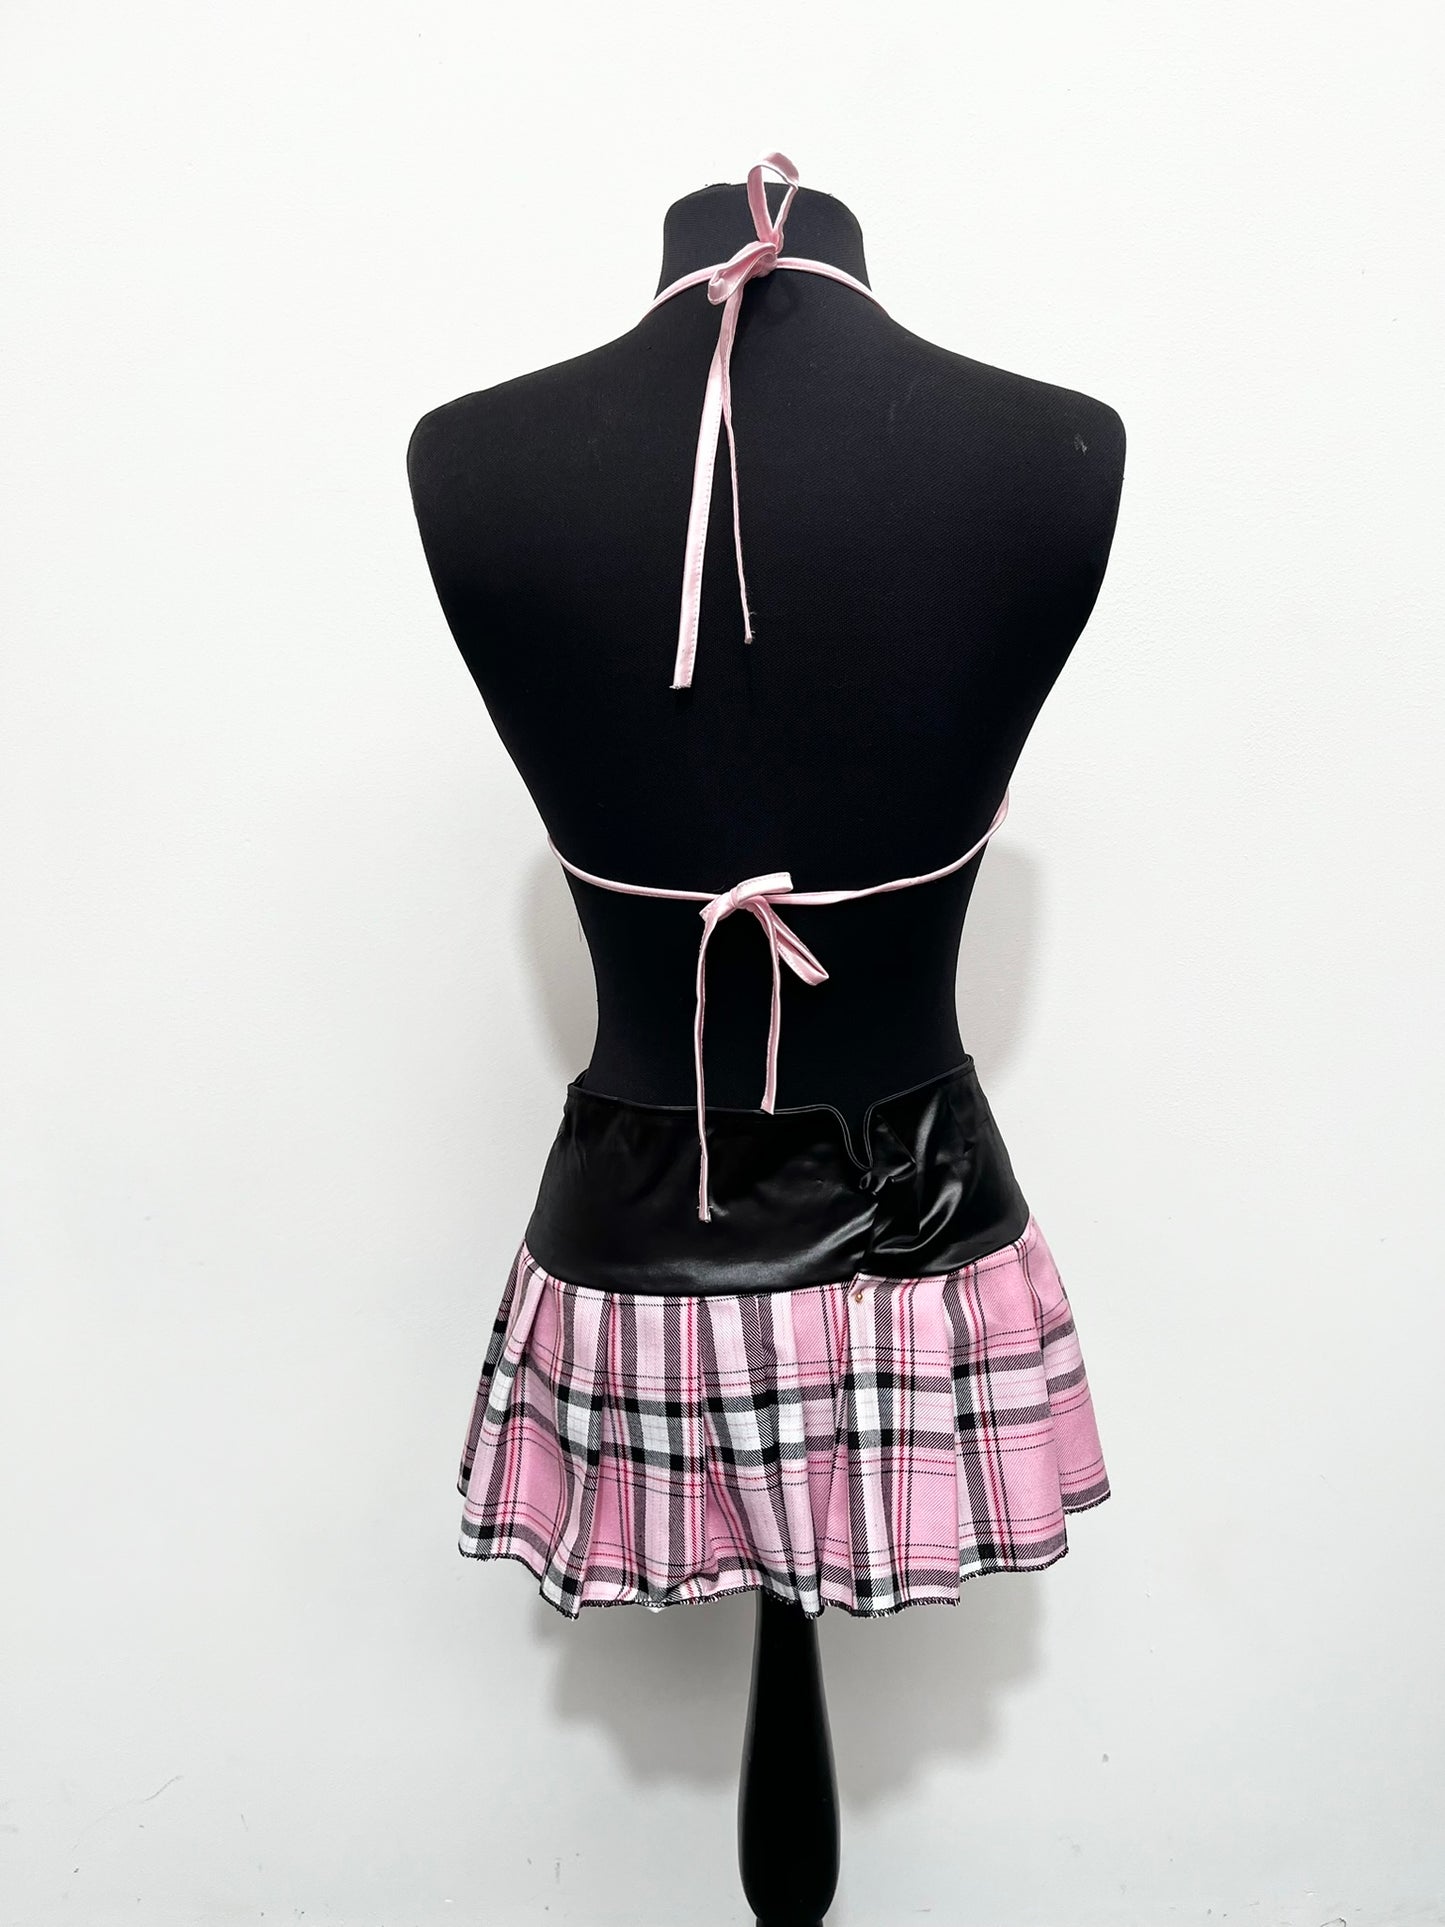 Sexy School Girl Outfit Size S/M - Ex Hire